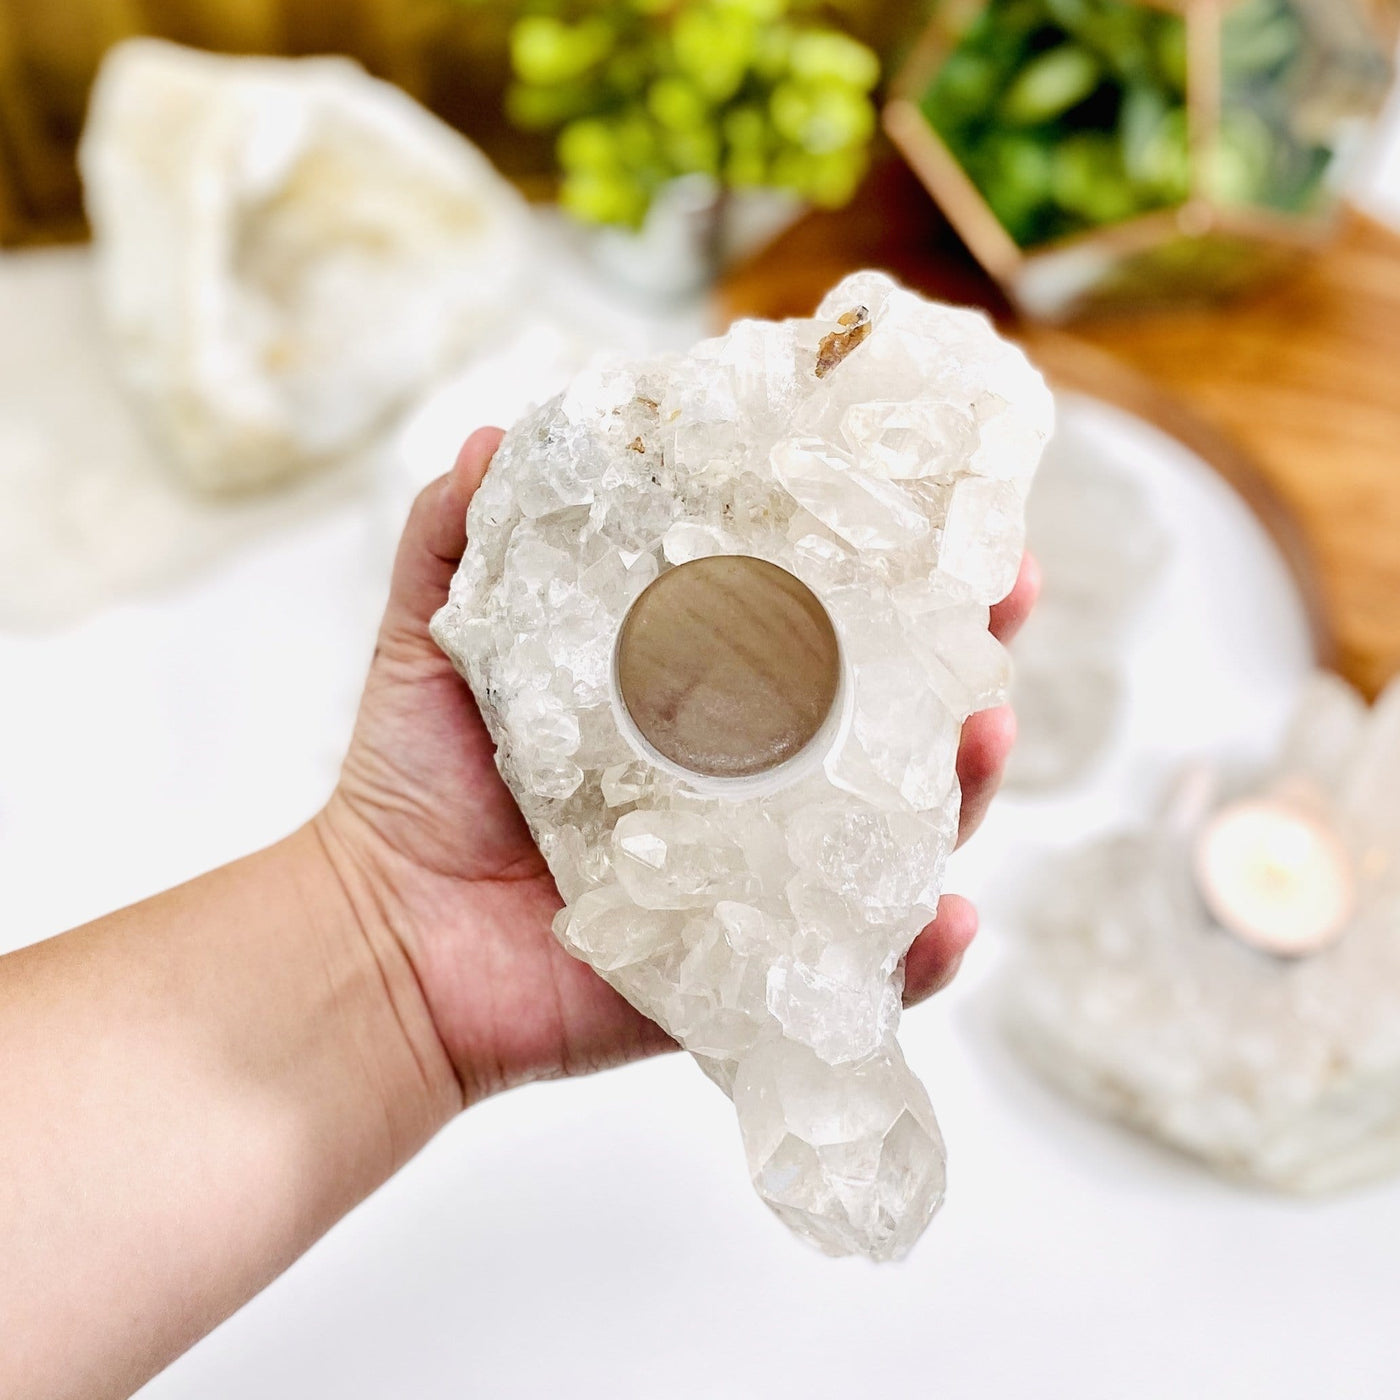 Crystal Quartz Cluster Candle Holder in a hand for size